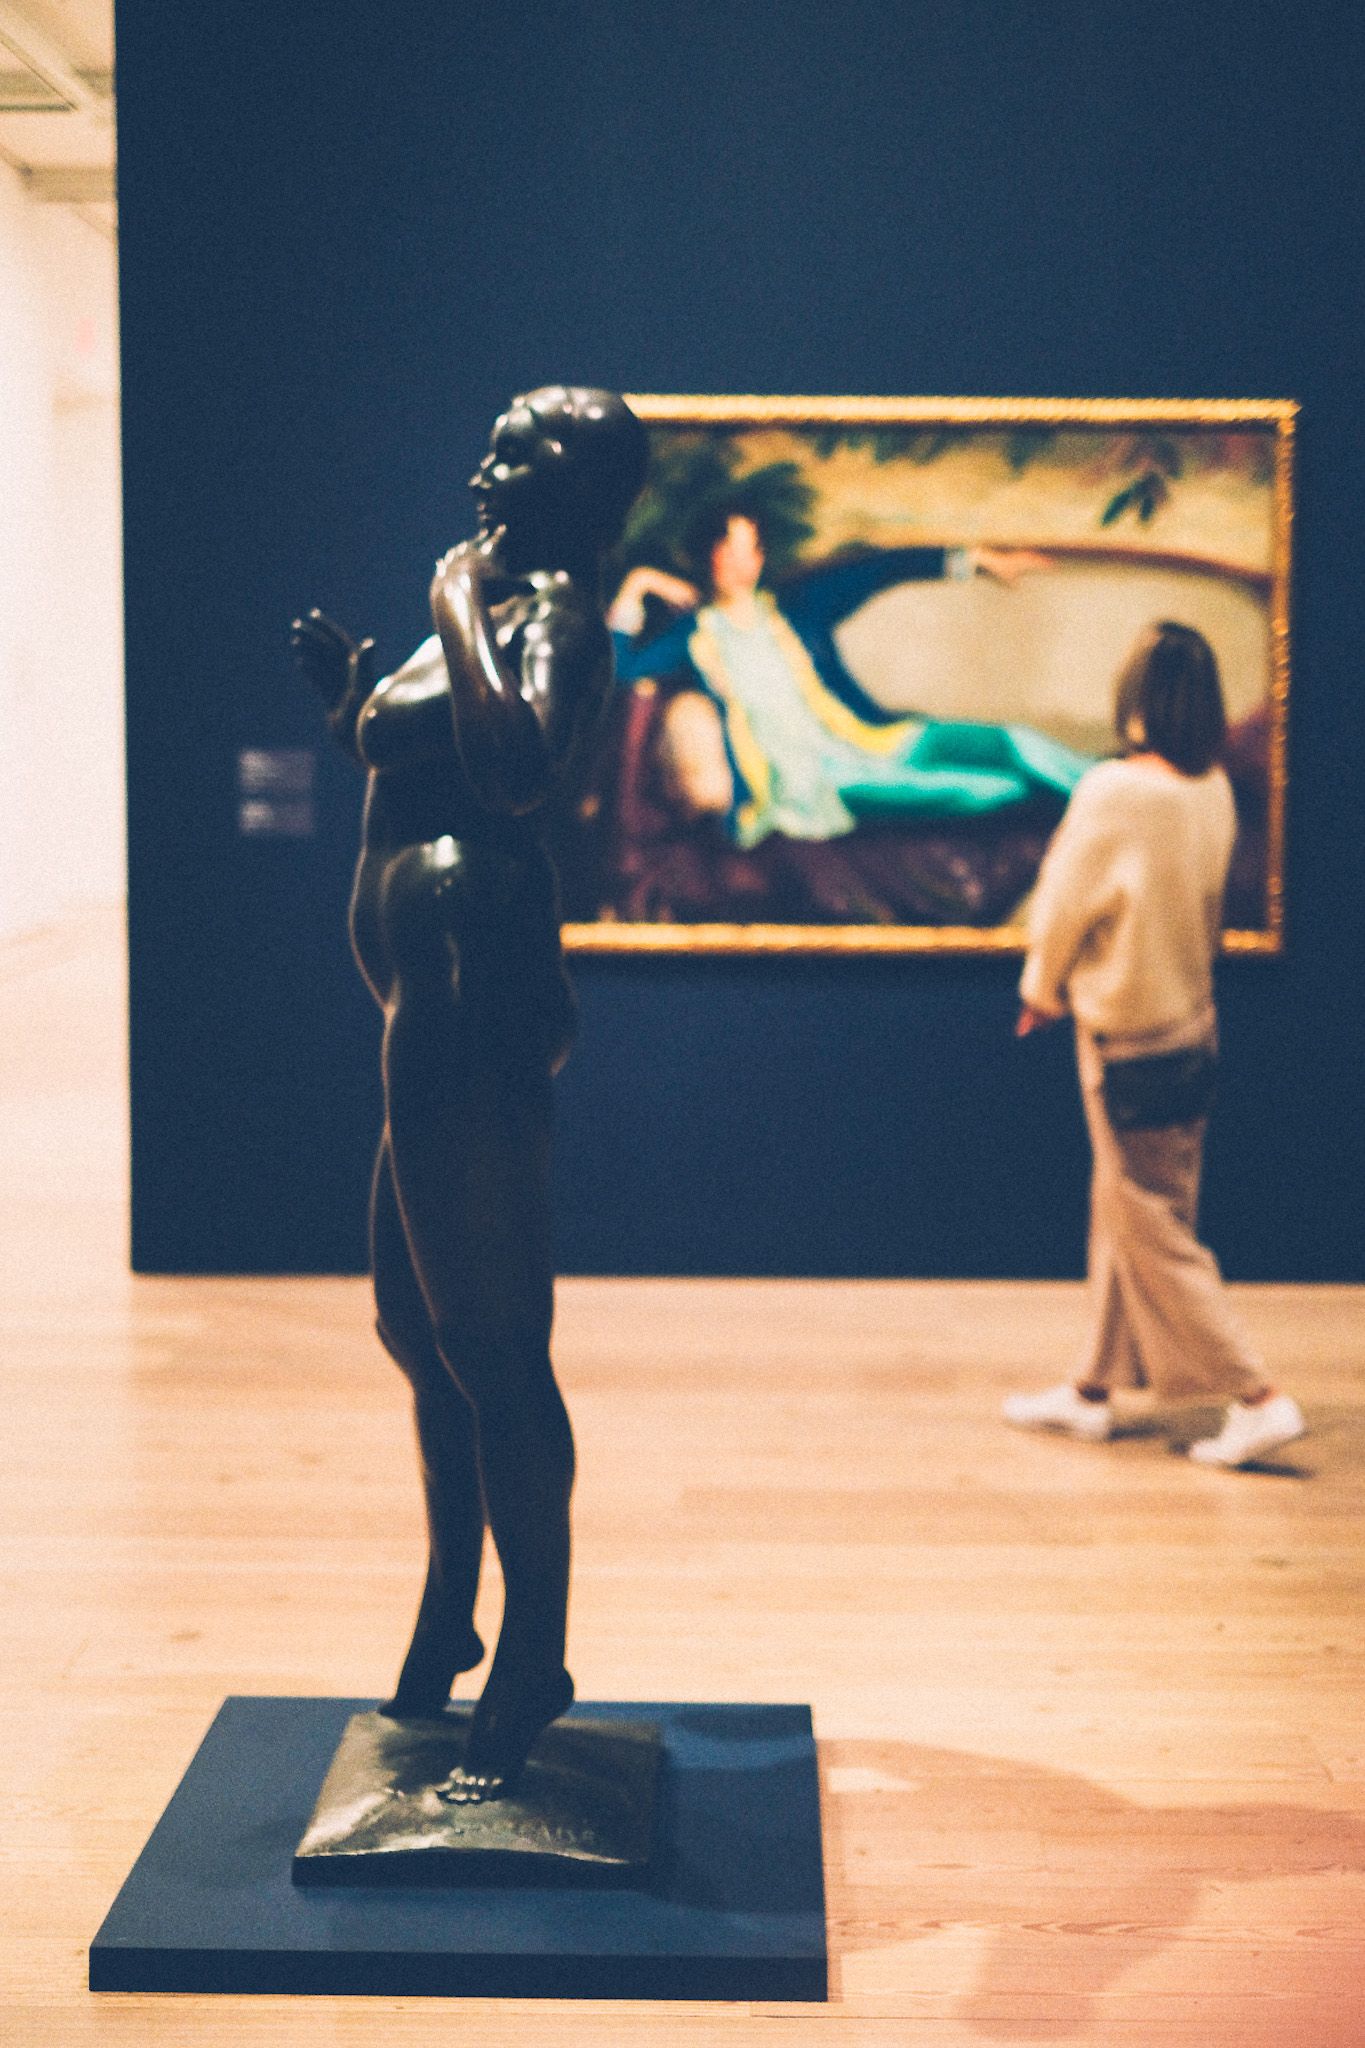 In a museum, a brass statue of a nude woman stands on the left side of the photo, showing her side profile, while in the background a person looks at a large painting of a woman lounging. The gallery wall is painted dark navy.